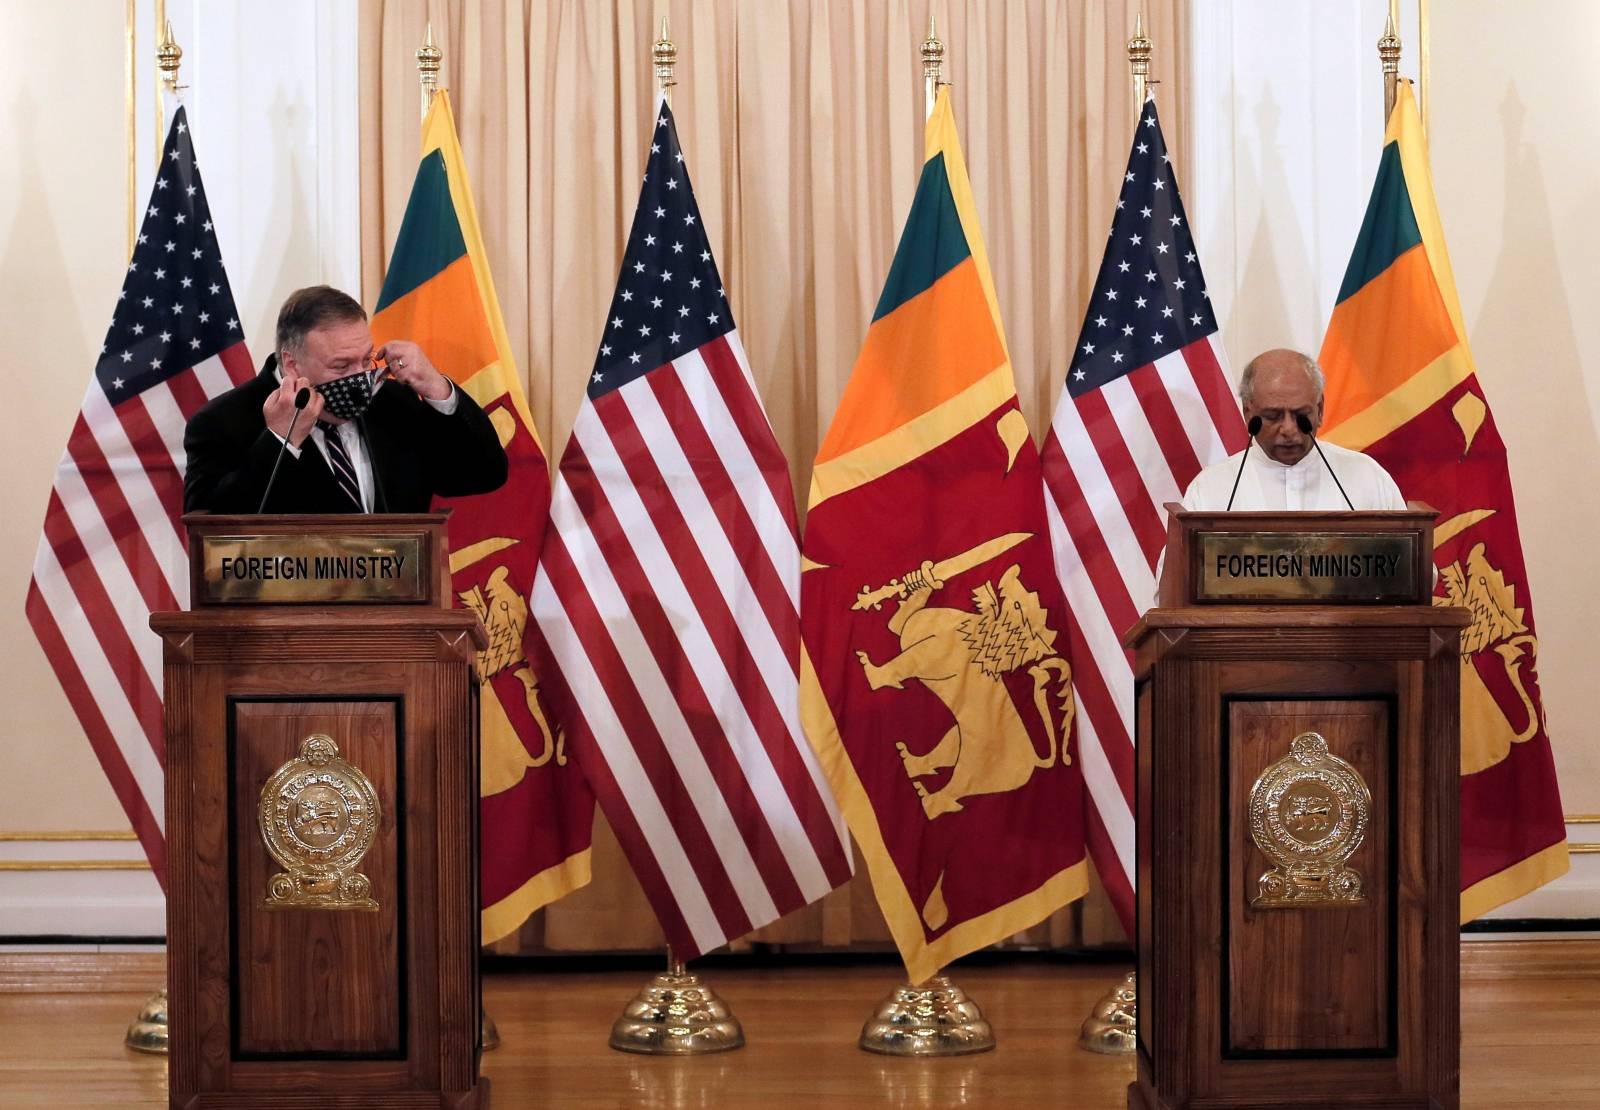 U.S. Secretary of State Mike Pompeo attends a bilateral meeting with Sri Lanka's Foreign Minister Dinesh Gunawardena in Colombo